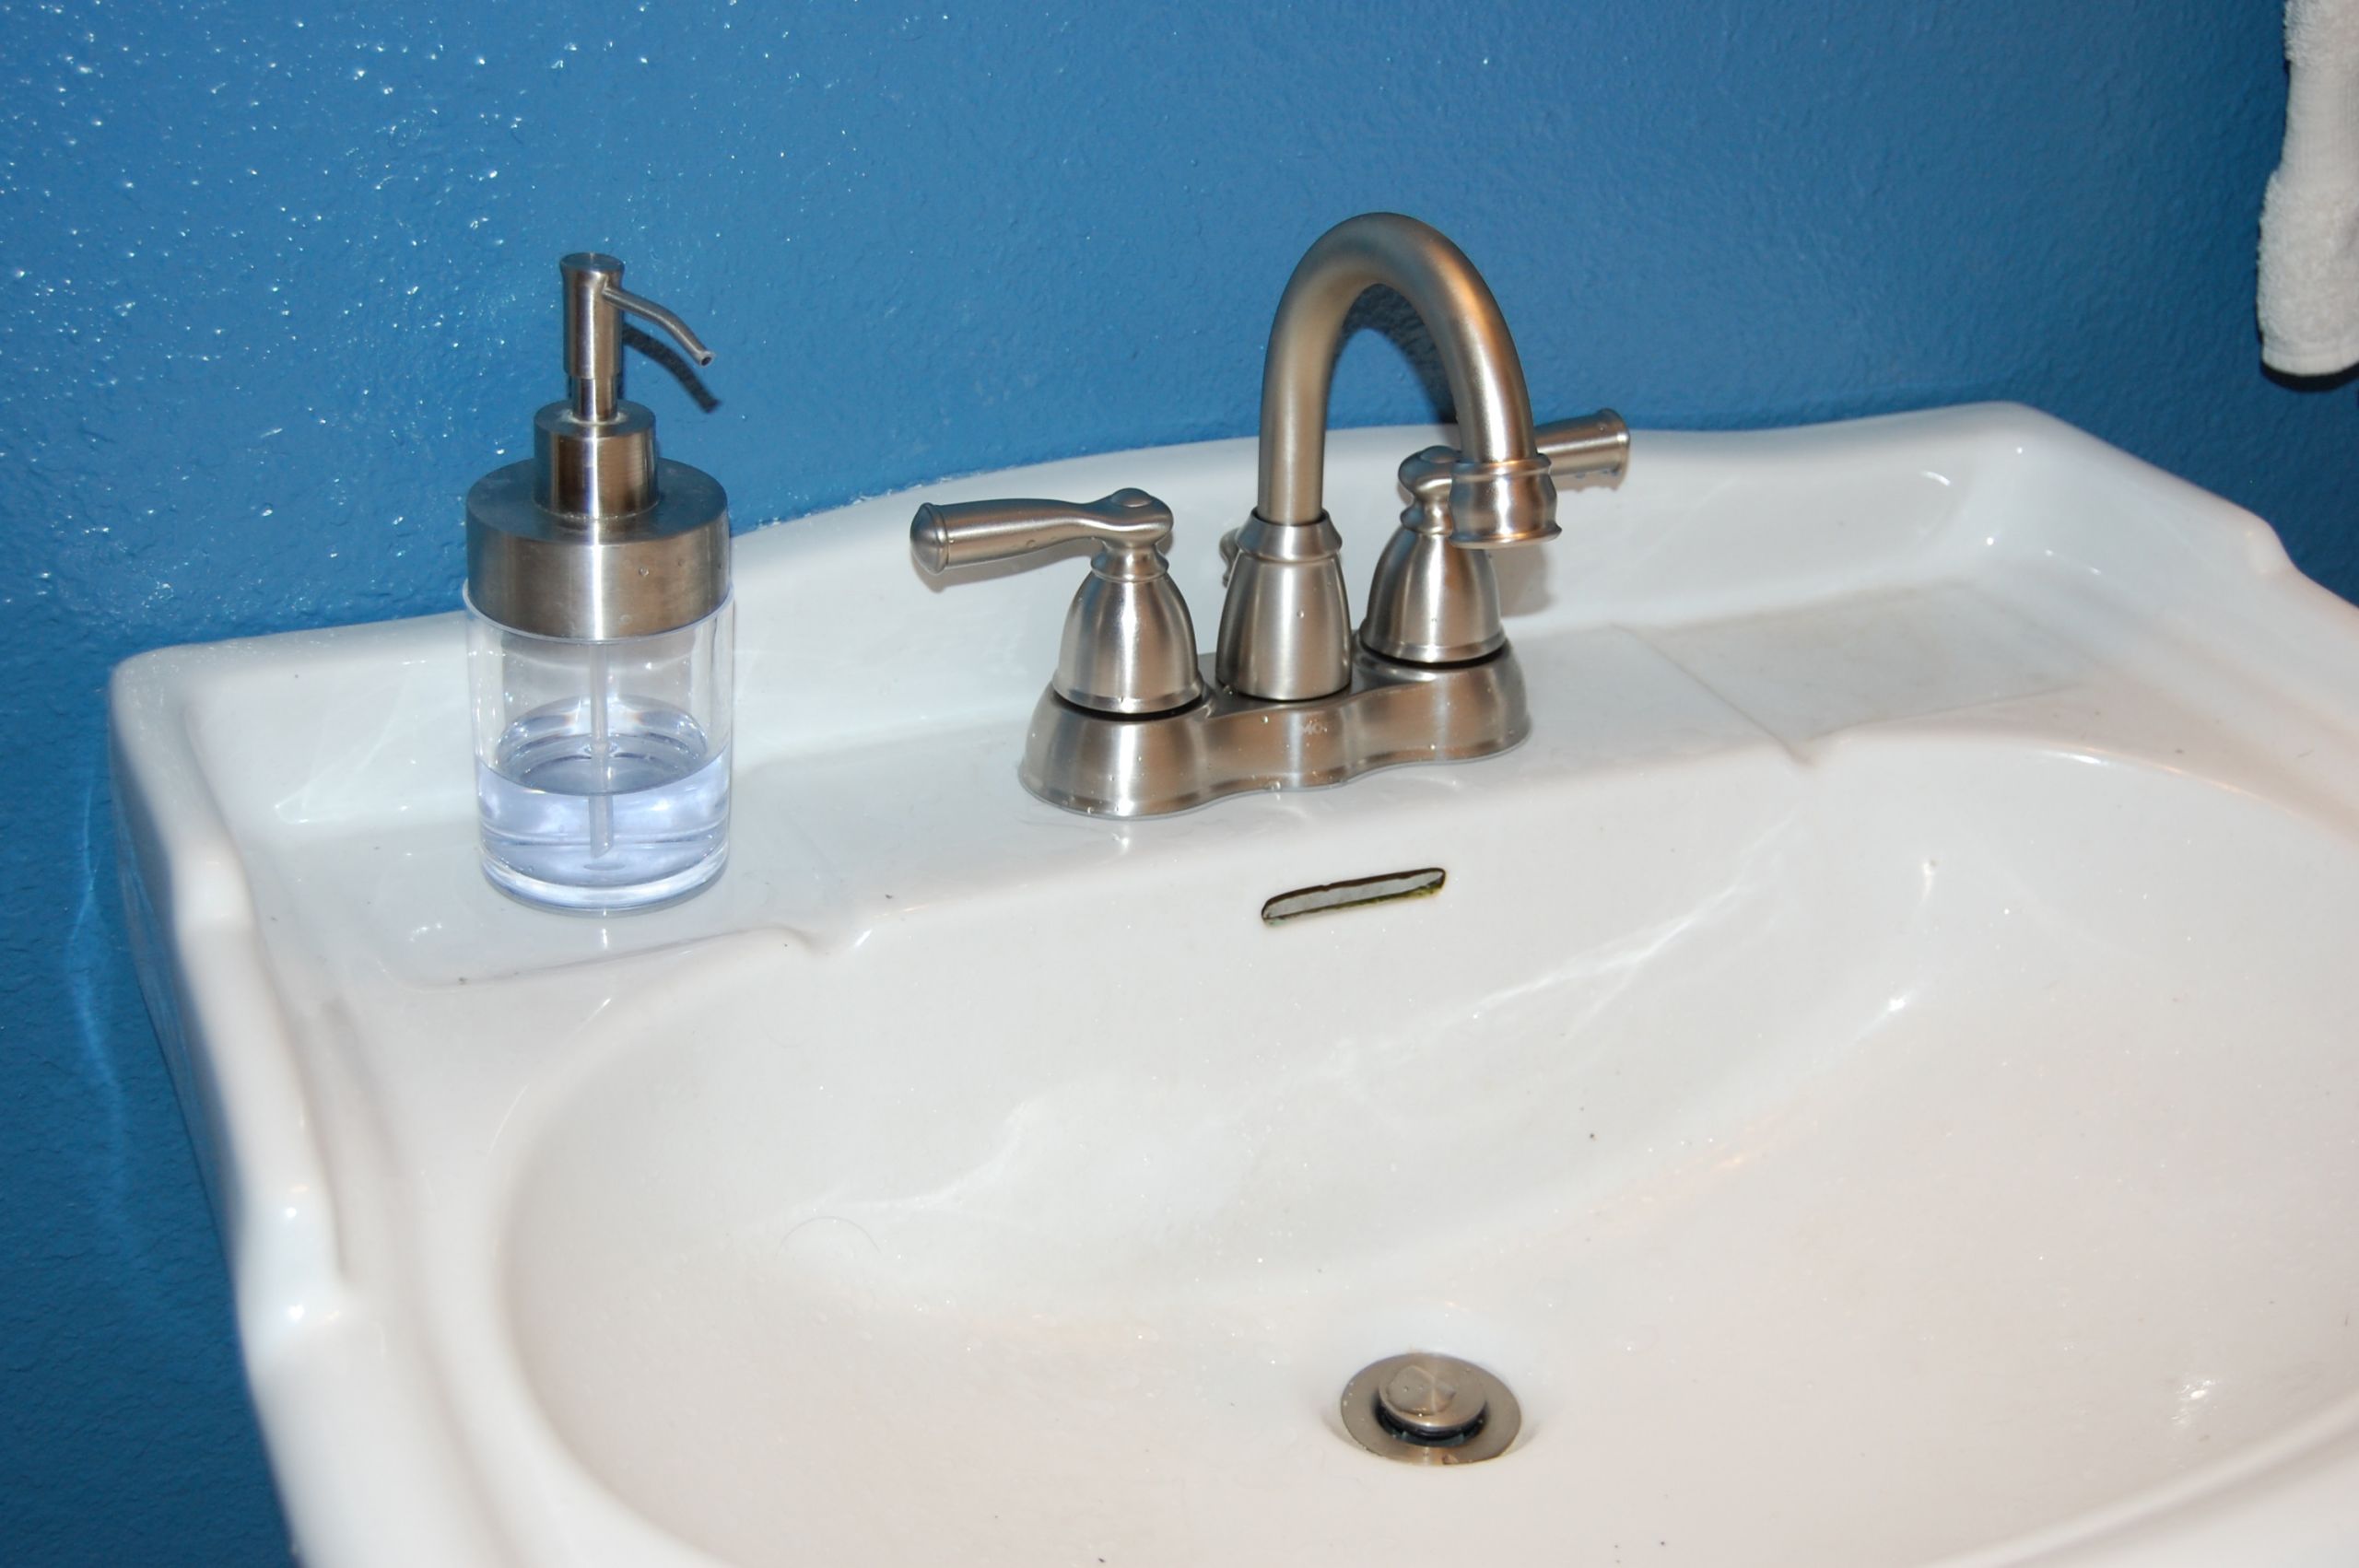 Cost To Install Bathroom Faucet
 How to remove & install a bathroom faucet pedestal sink